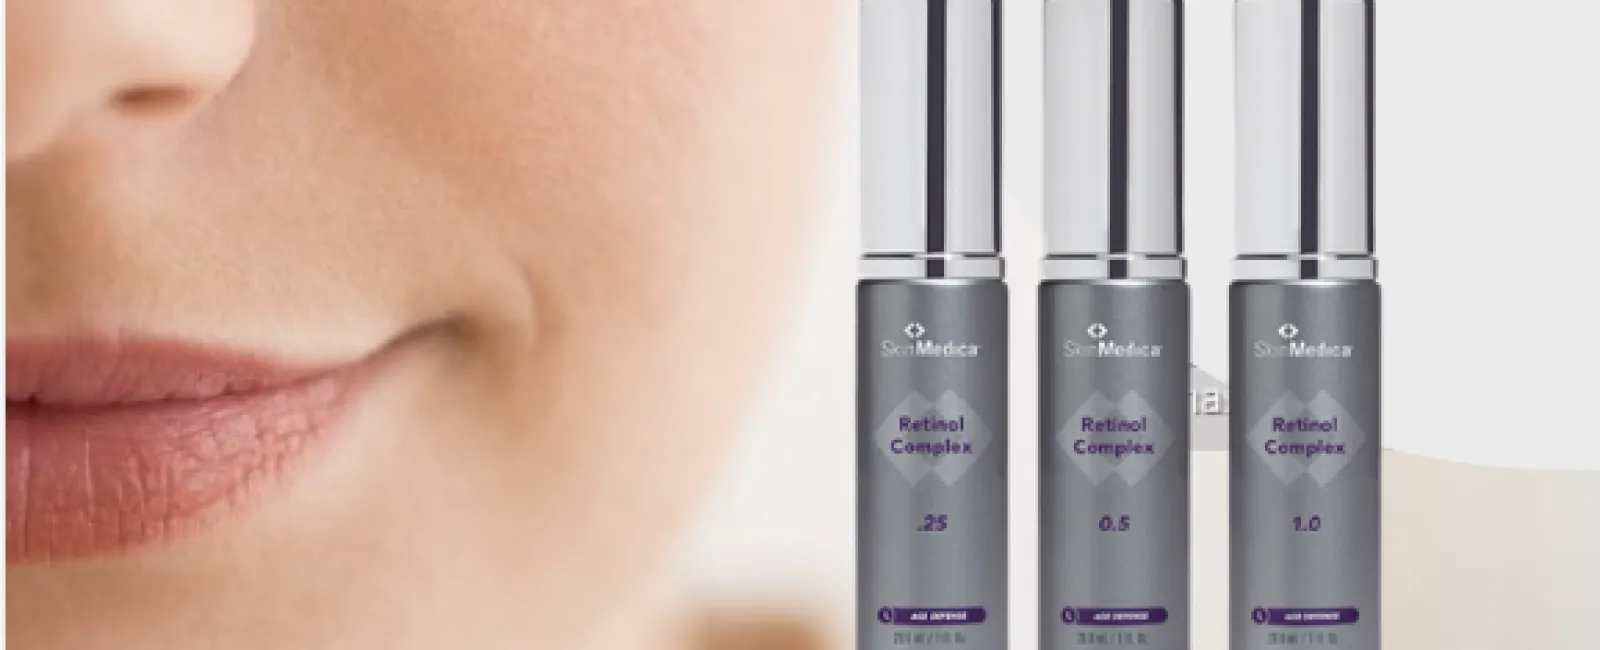 Bring Your “A” Game – Retinol and Retinoids For Youthful And Refreshed Skin